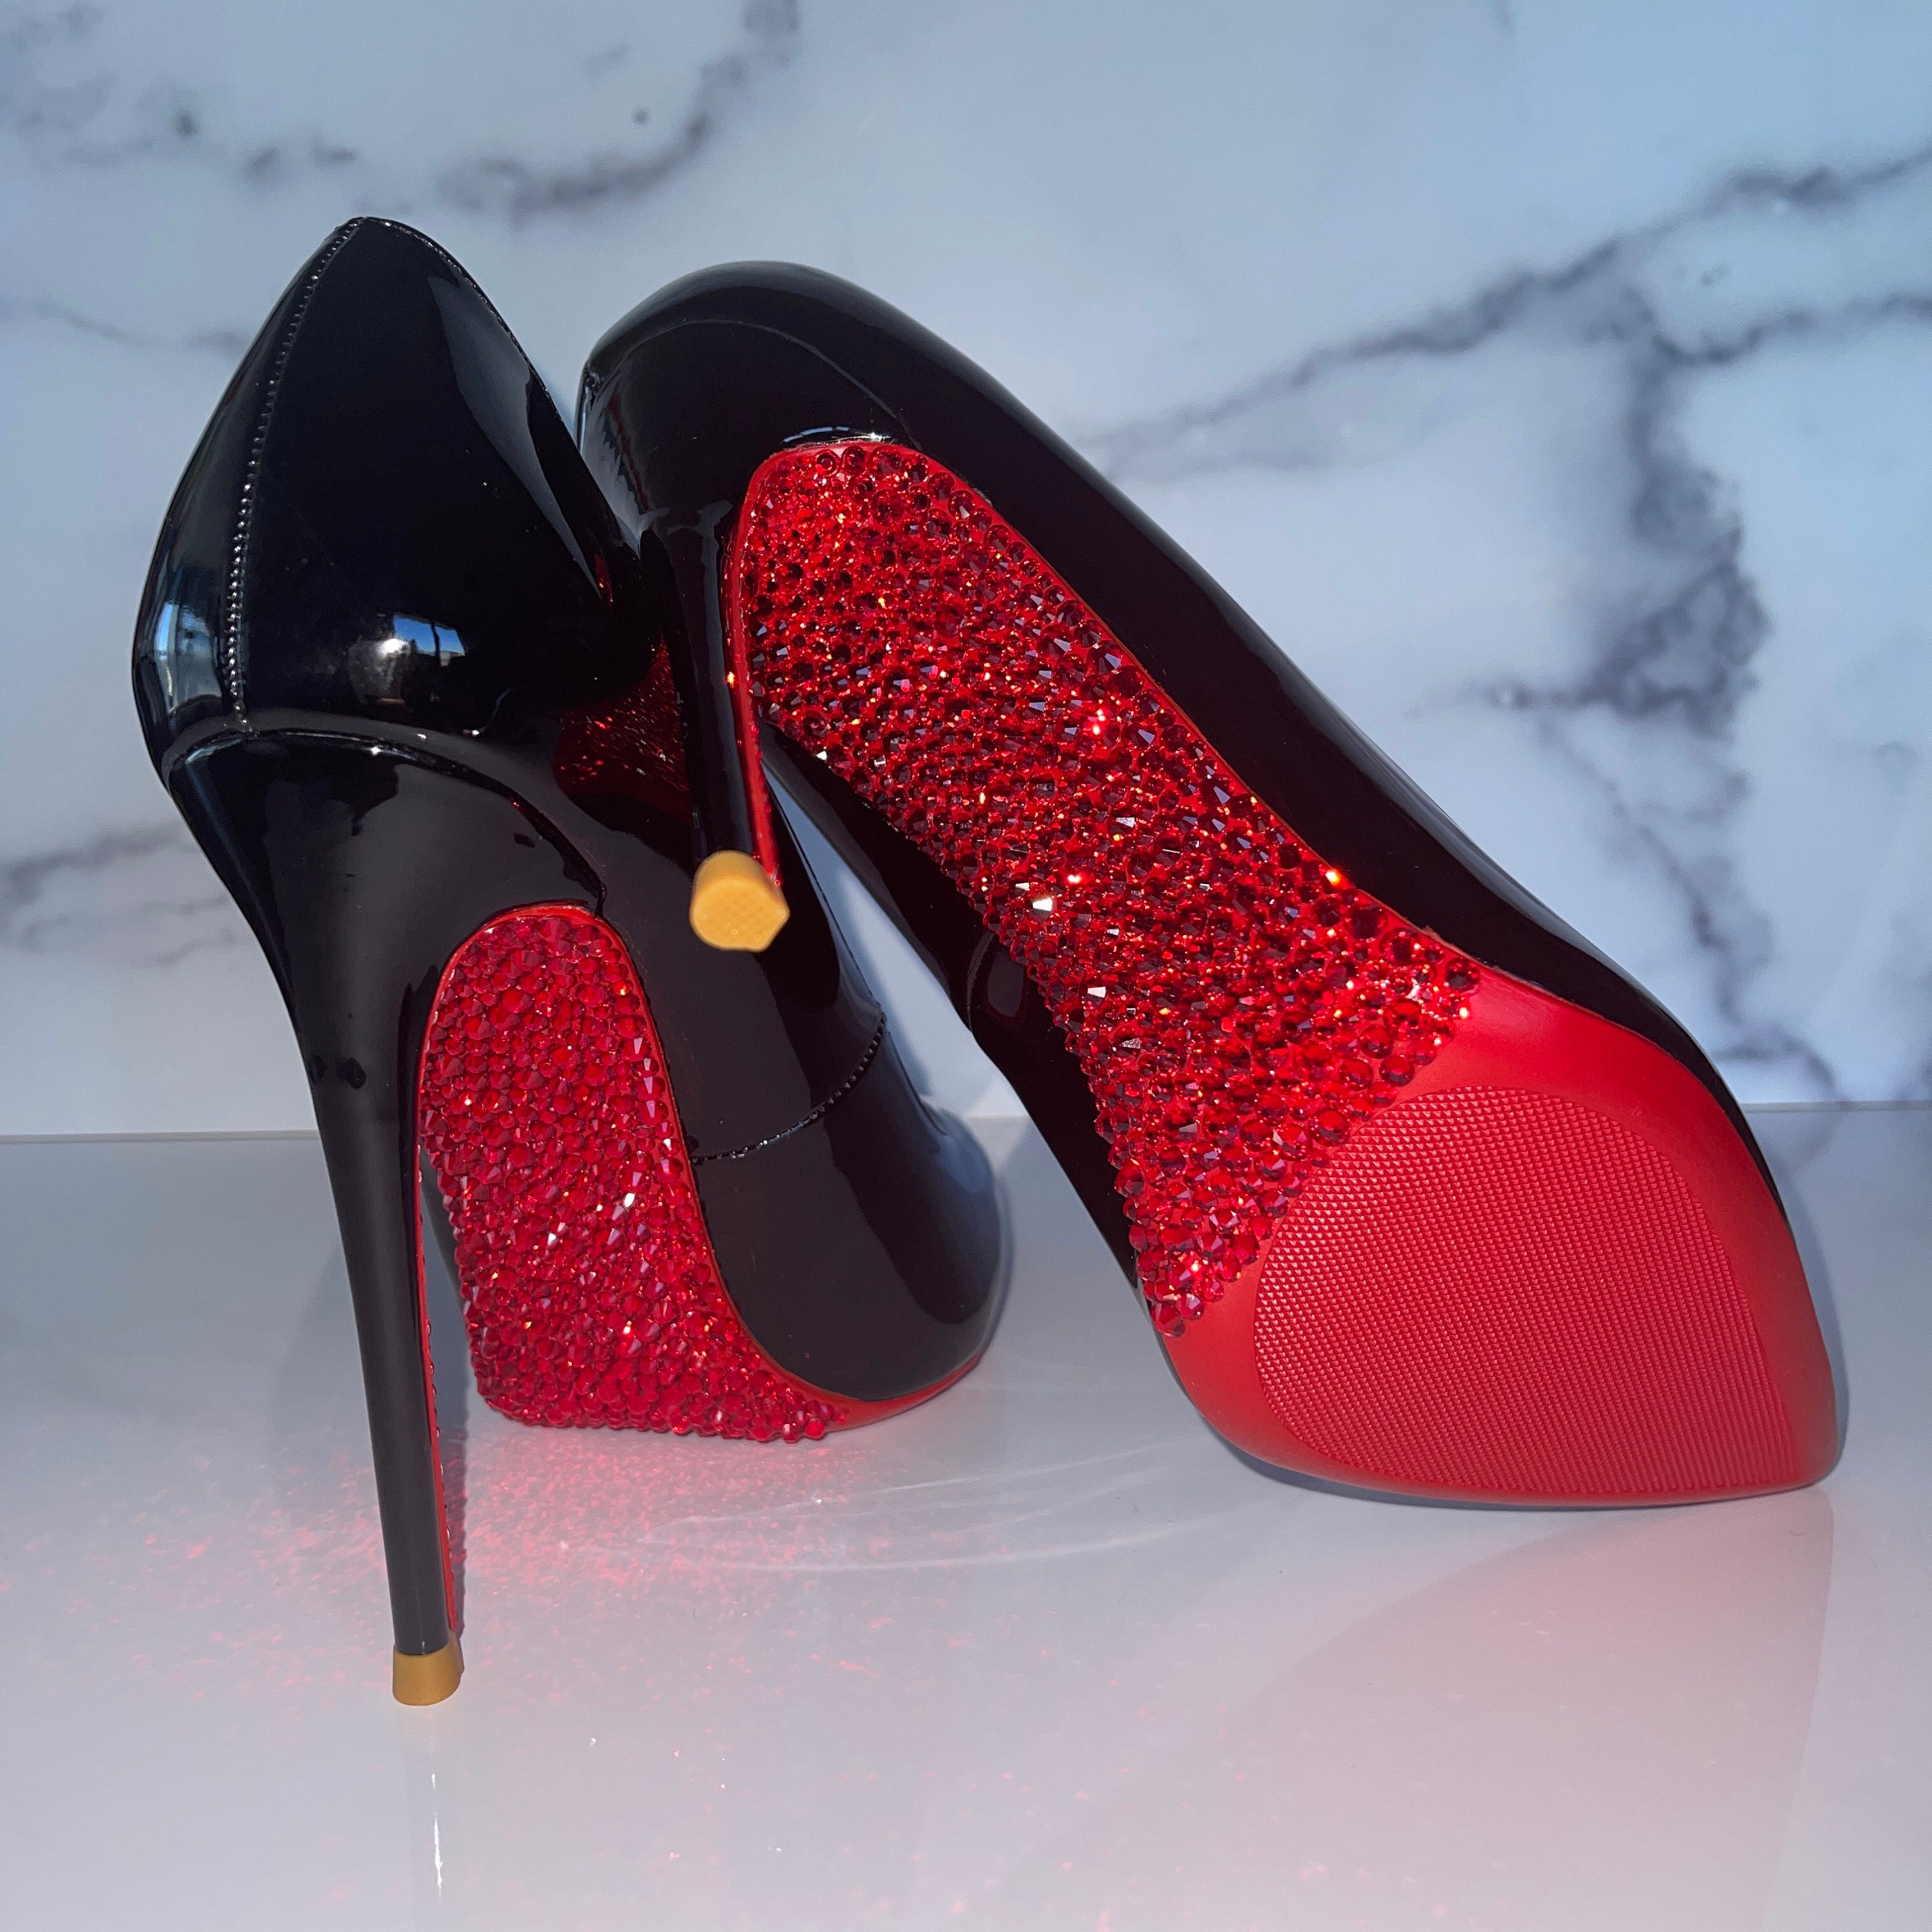 louis vuitton red bottom shoes as Christmas gift